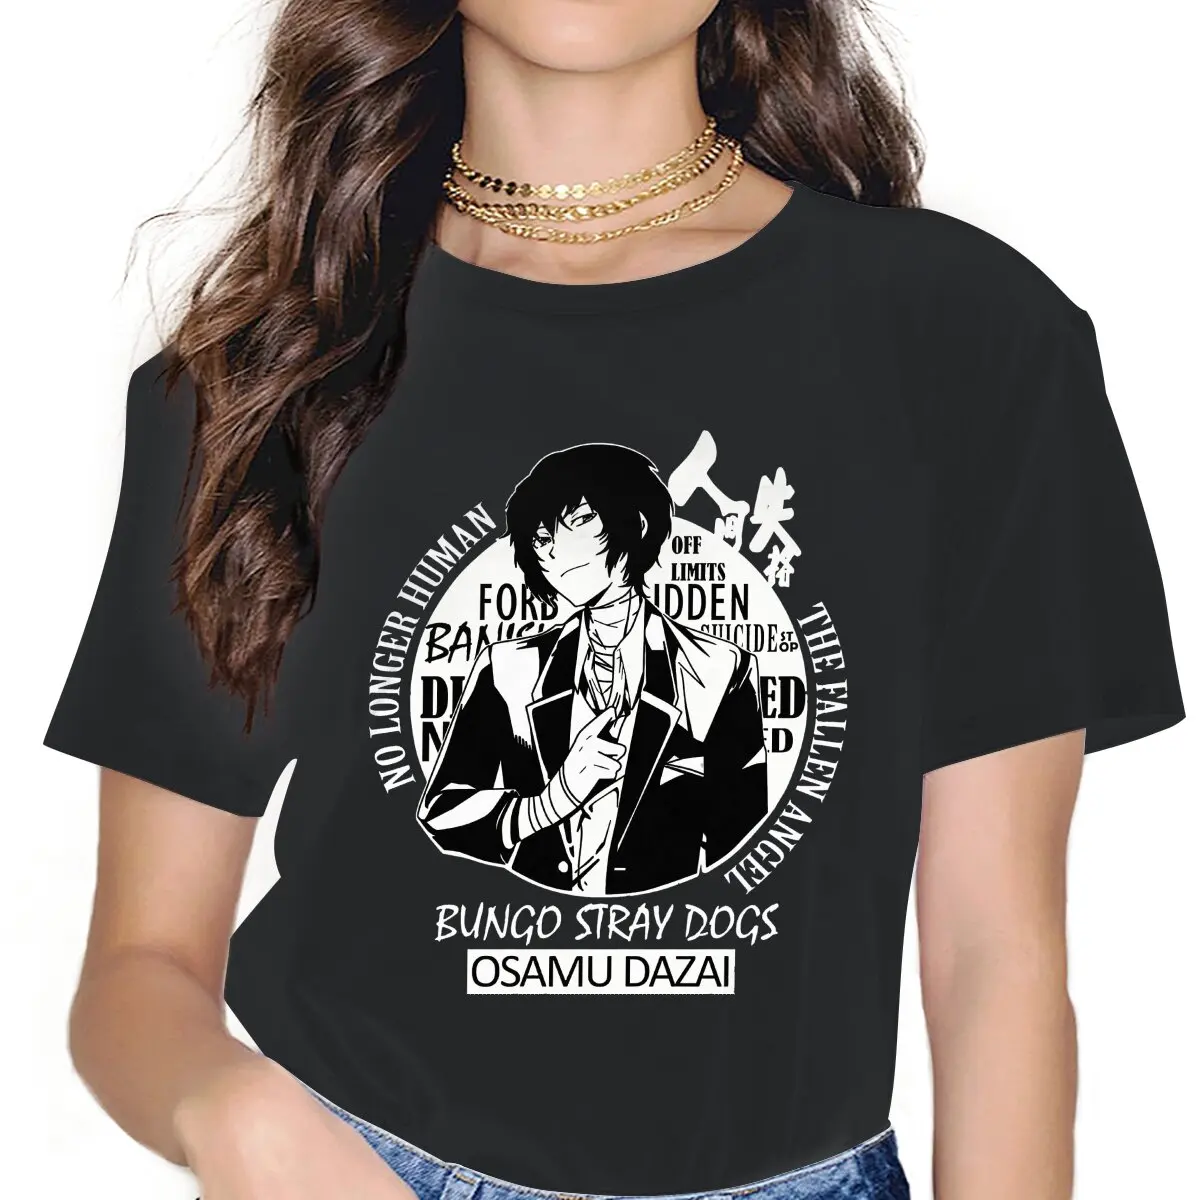 

Armed Detective Women Clothing Bungou Stray Dogs Wan Anime Graphic Female Tshirts Vintage Gothic Loose Tops Tee Kawaii